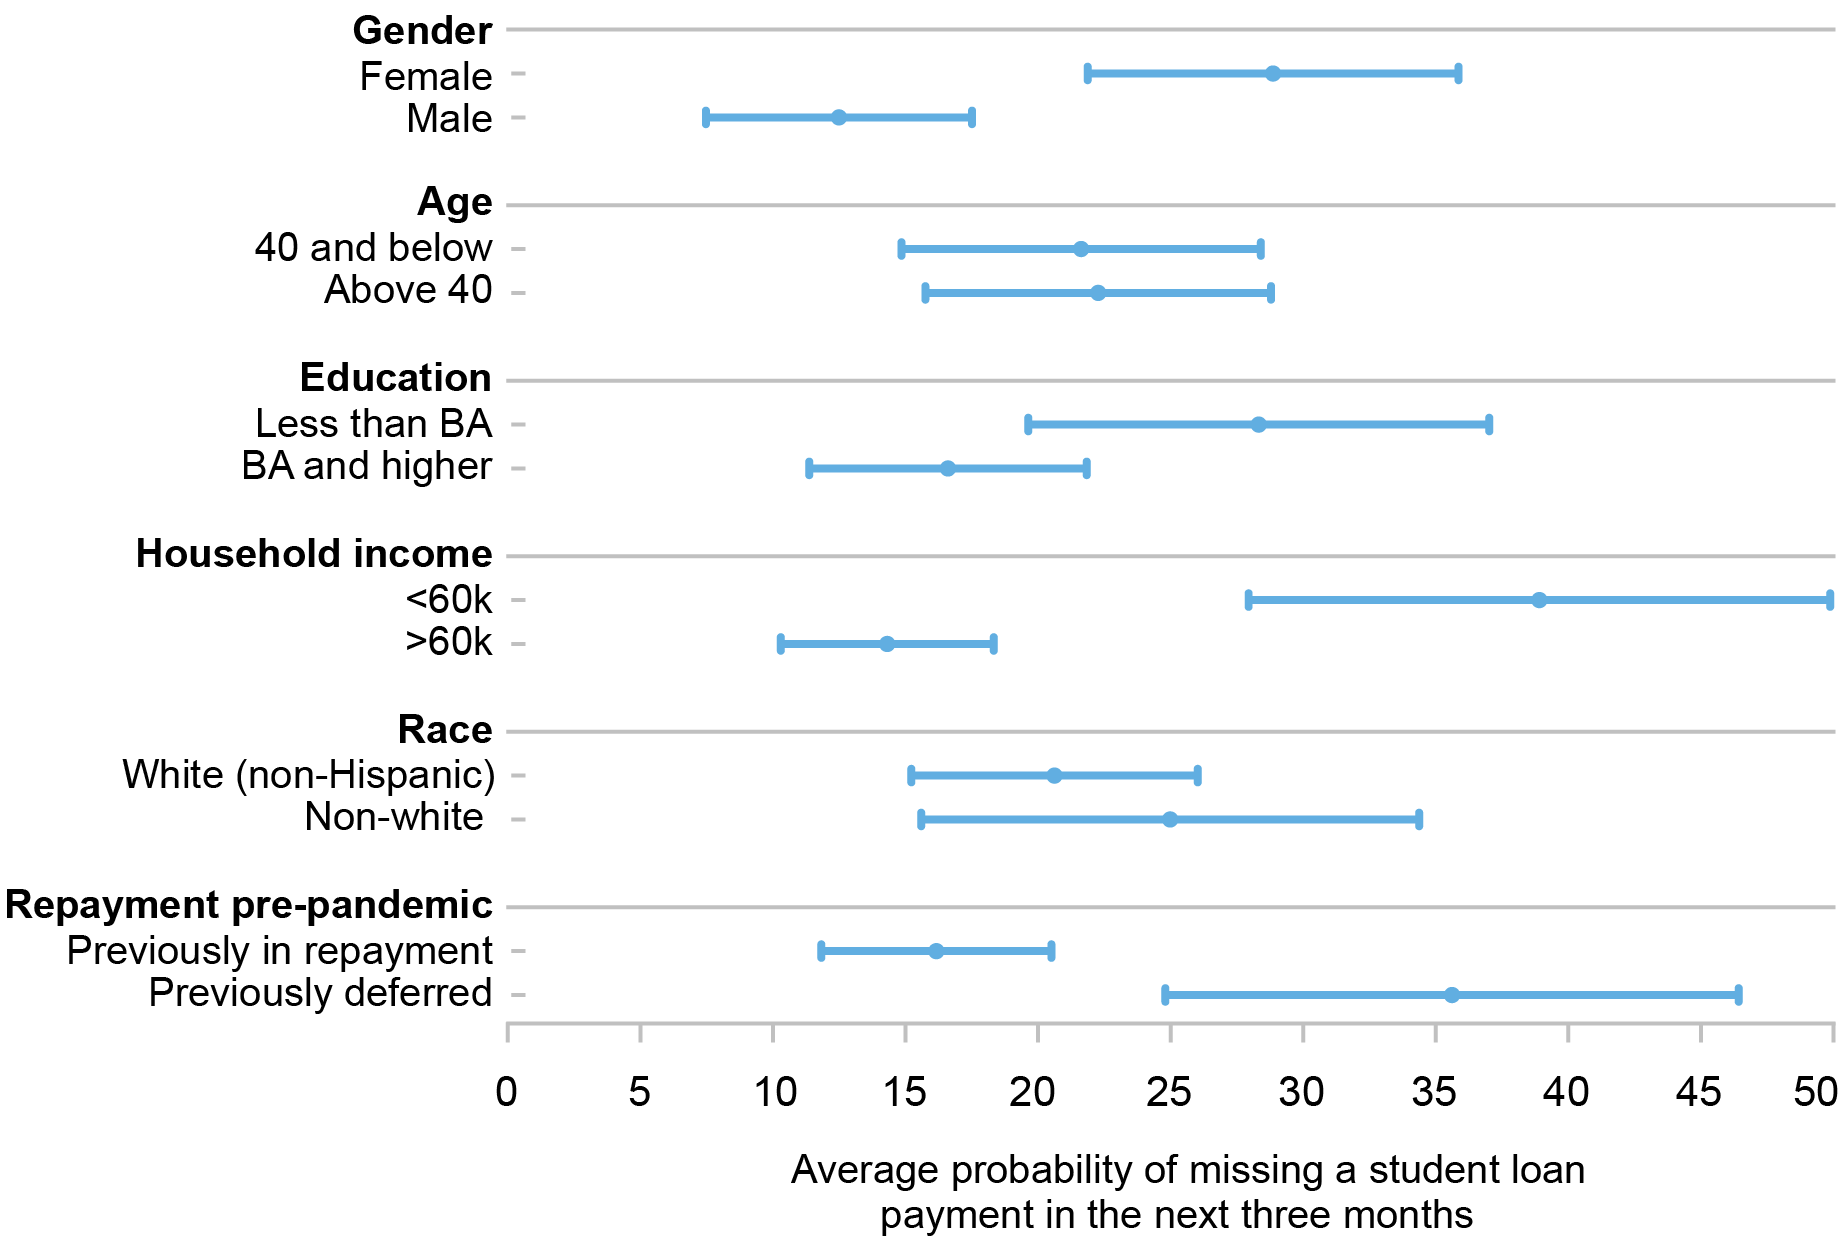 This chart compares the self-reported probability of missing a student loan payment across gender, age, education, household income, race and pre-pandemic repayment status, finding stark and statistically significant differences across gender and income. 